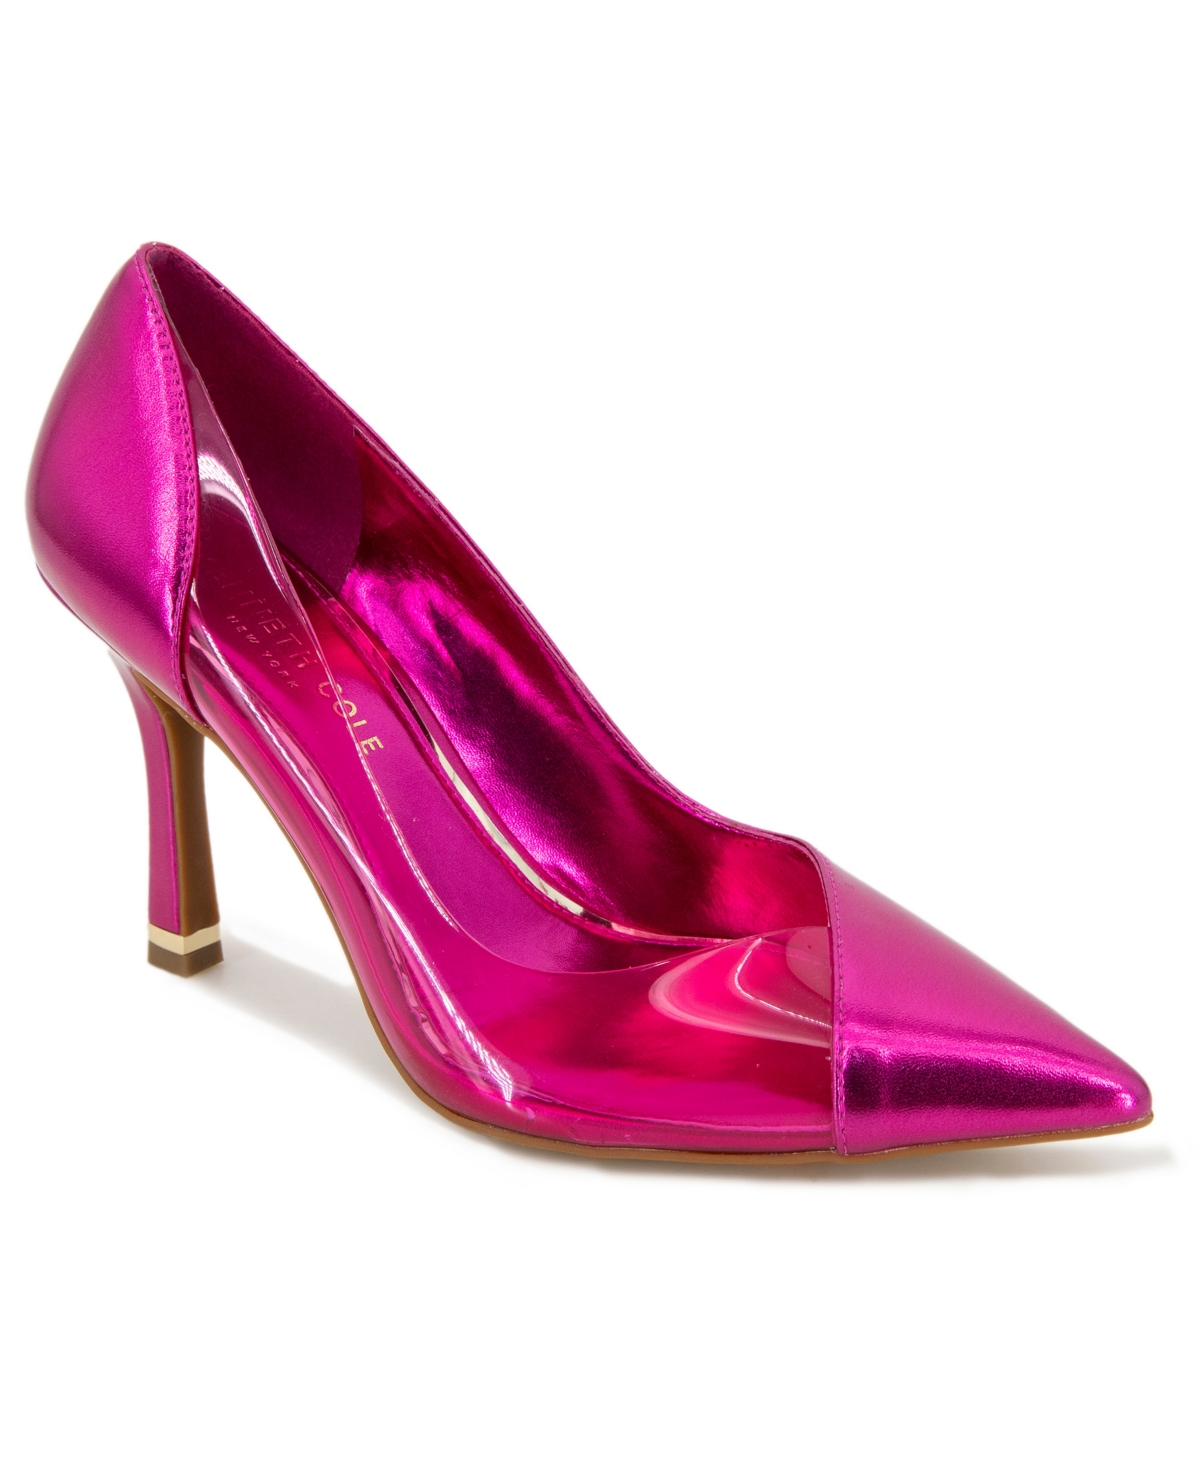 KENNETH COLE NEW YORK Pumps for Women | ModeSens